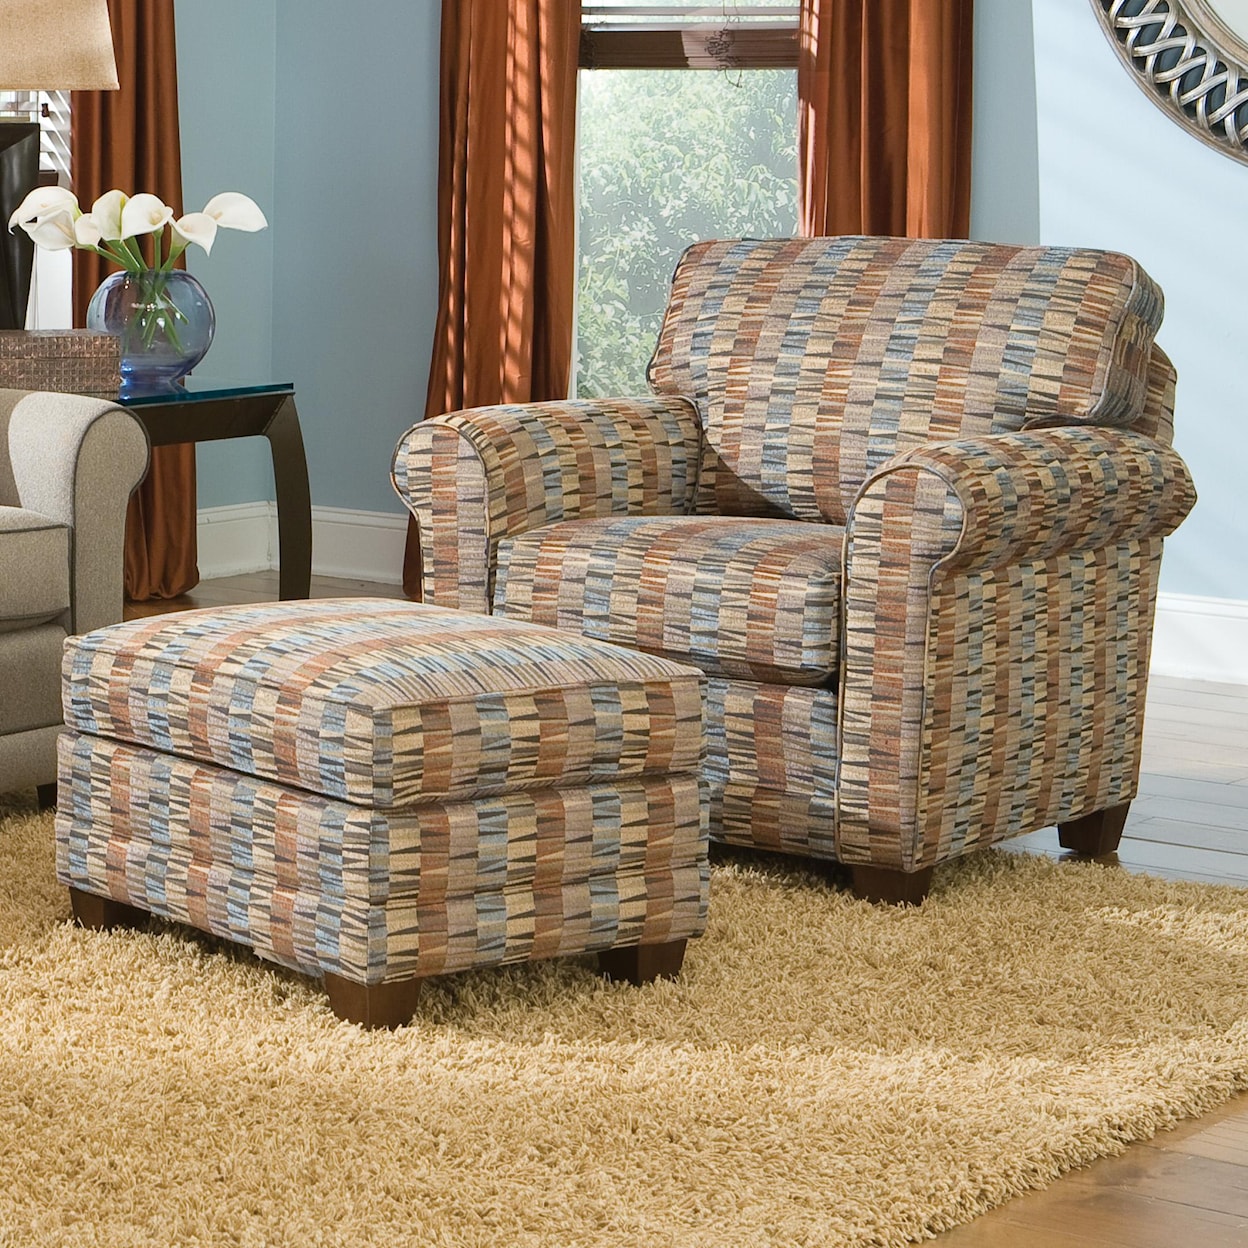 Smith Brothers 366 Casual Chair and Ottoman